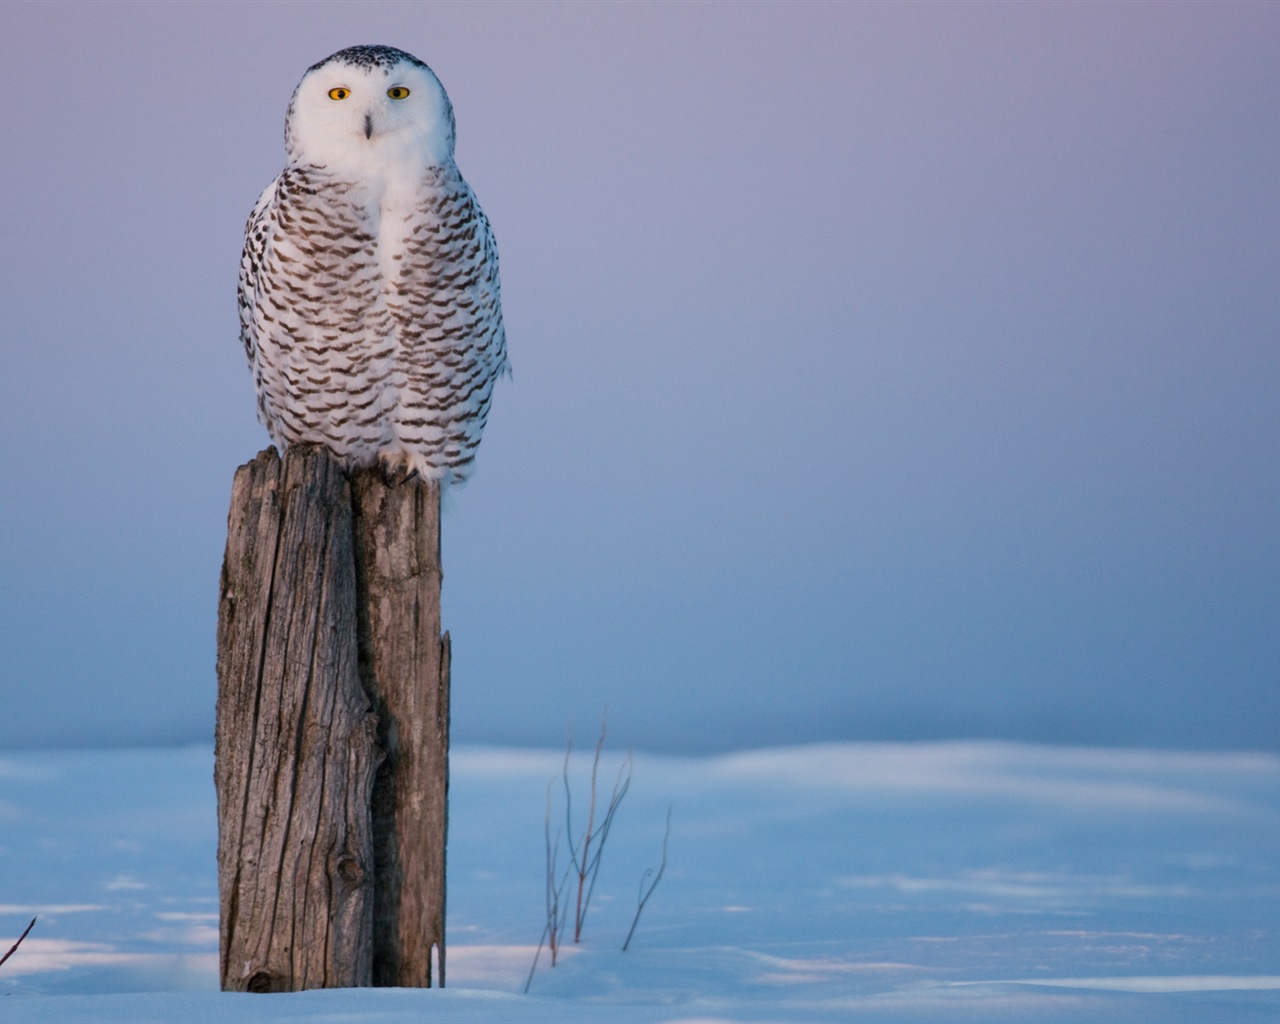 Windows 8 Wallpapers: Arctic, the nature ecological landscape, arctic animals #2 - 1280x1024